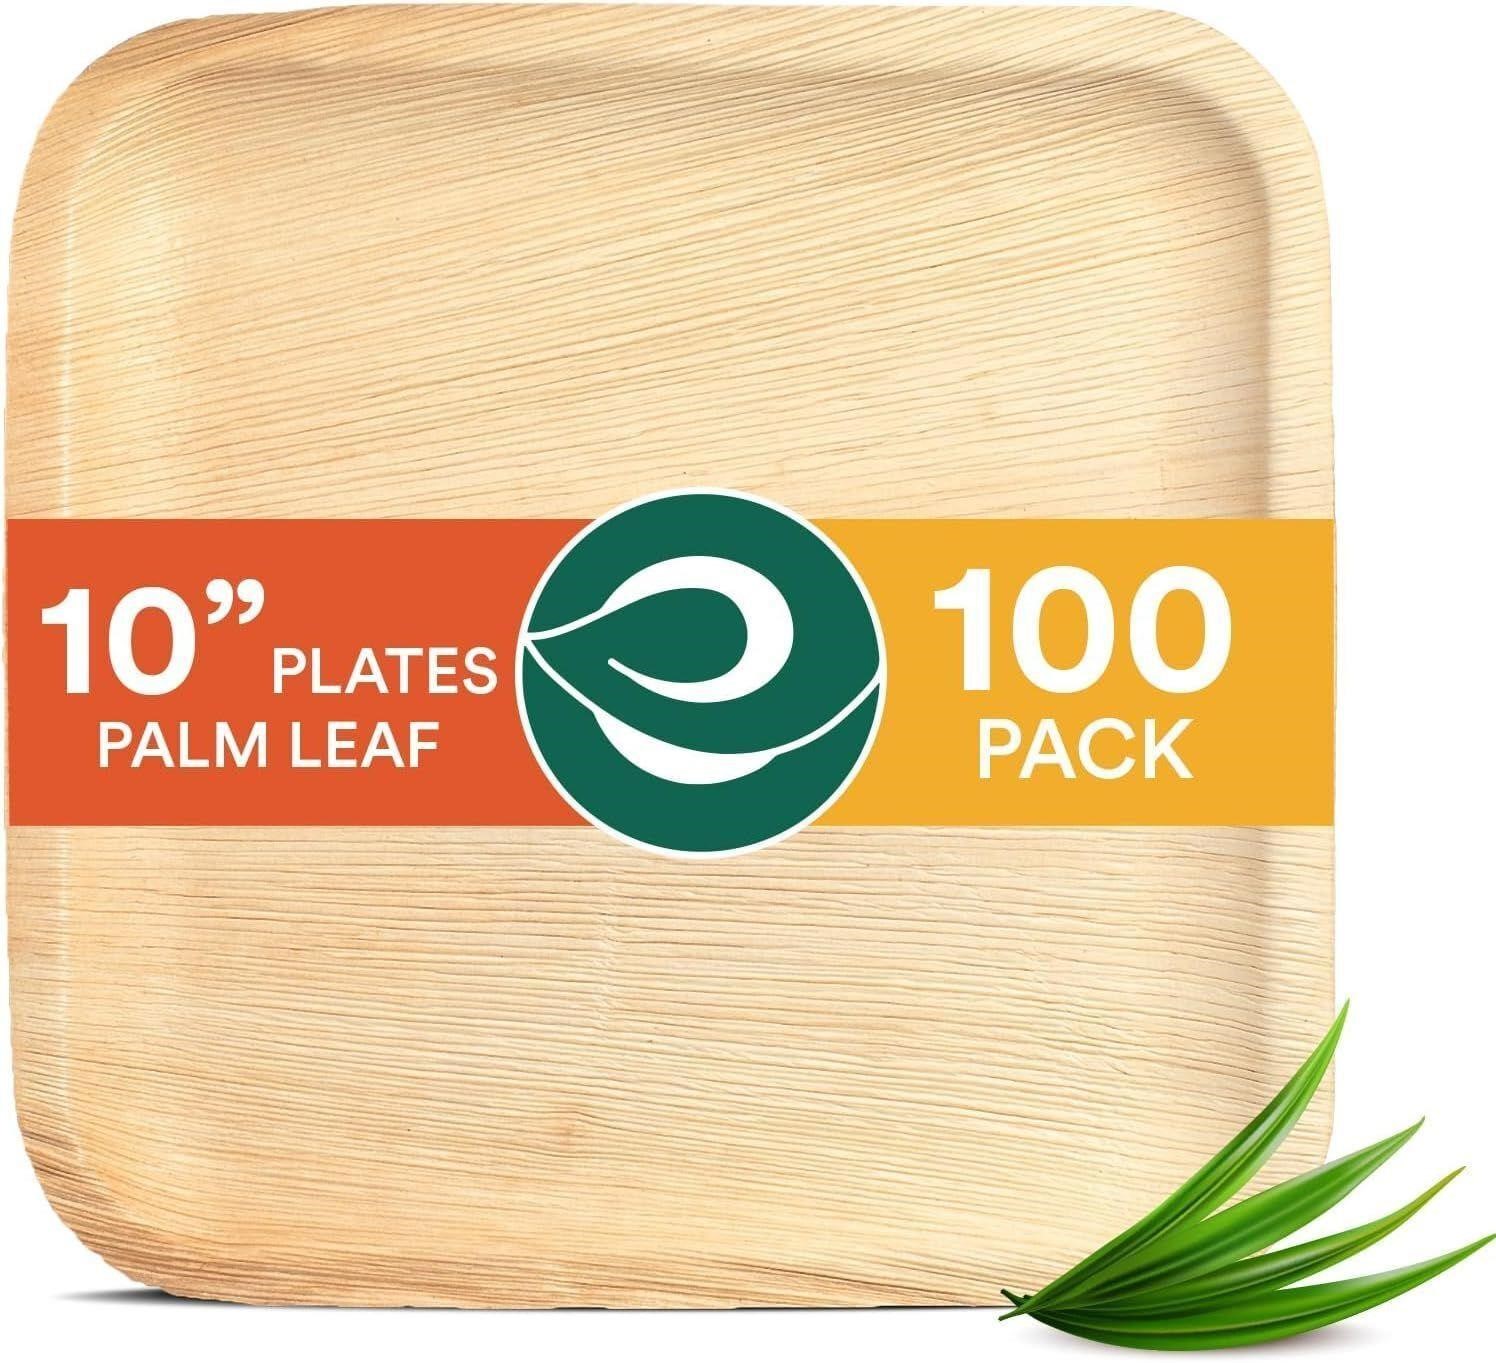 NEW $89 Square 10in Palm Leaf Plates 100Pack